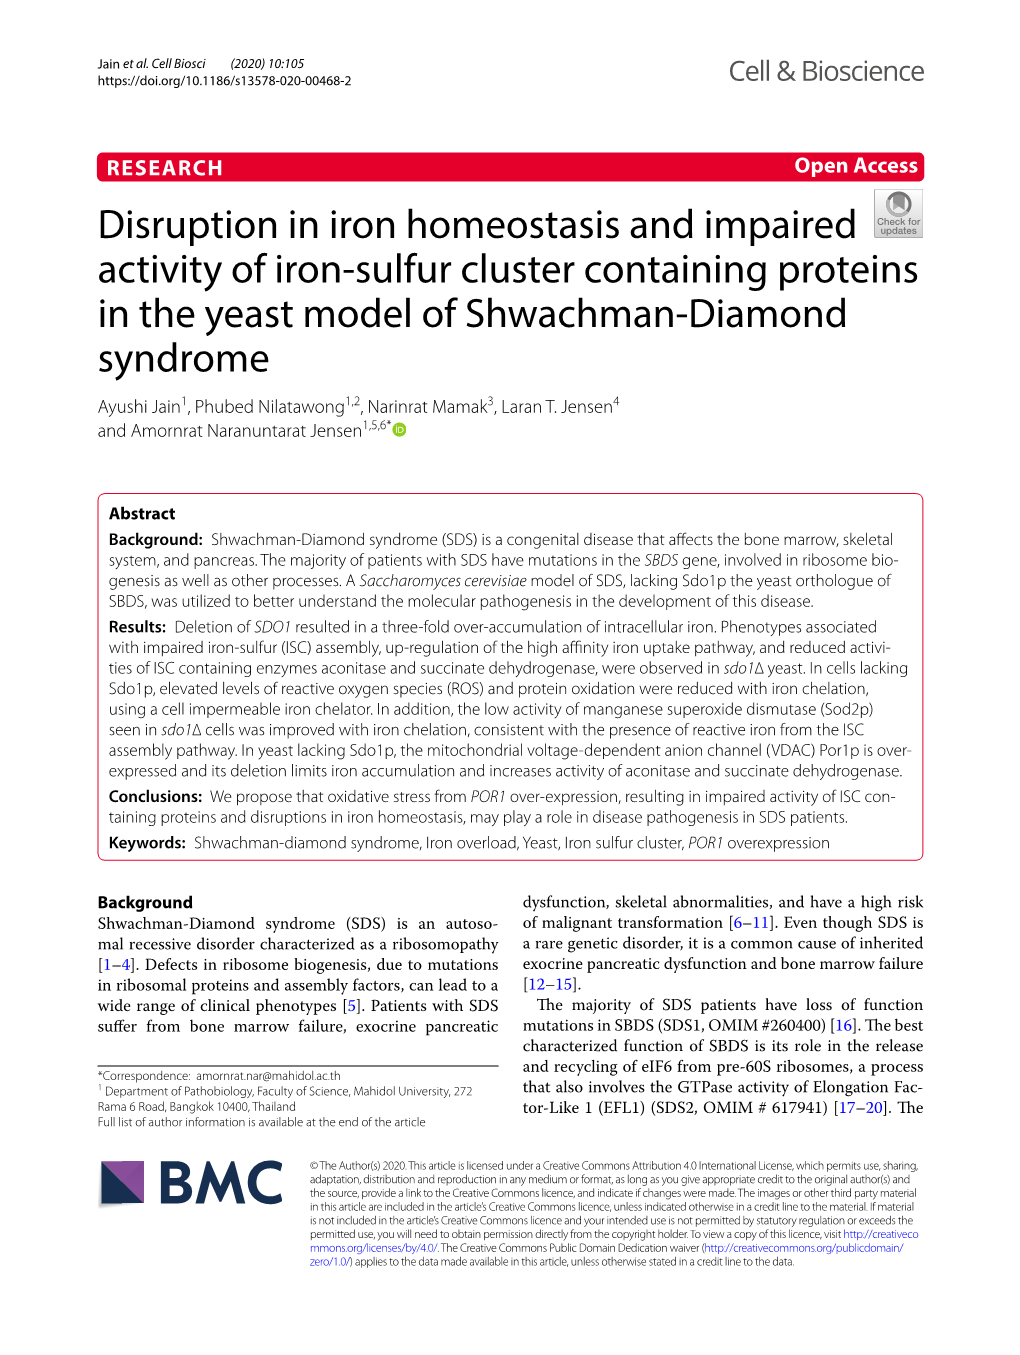 Disruption in Iron Homeostasis and Impaired Activity